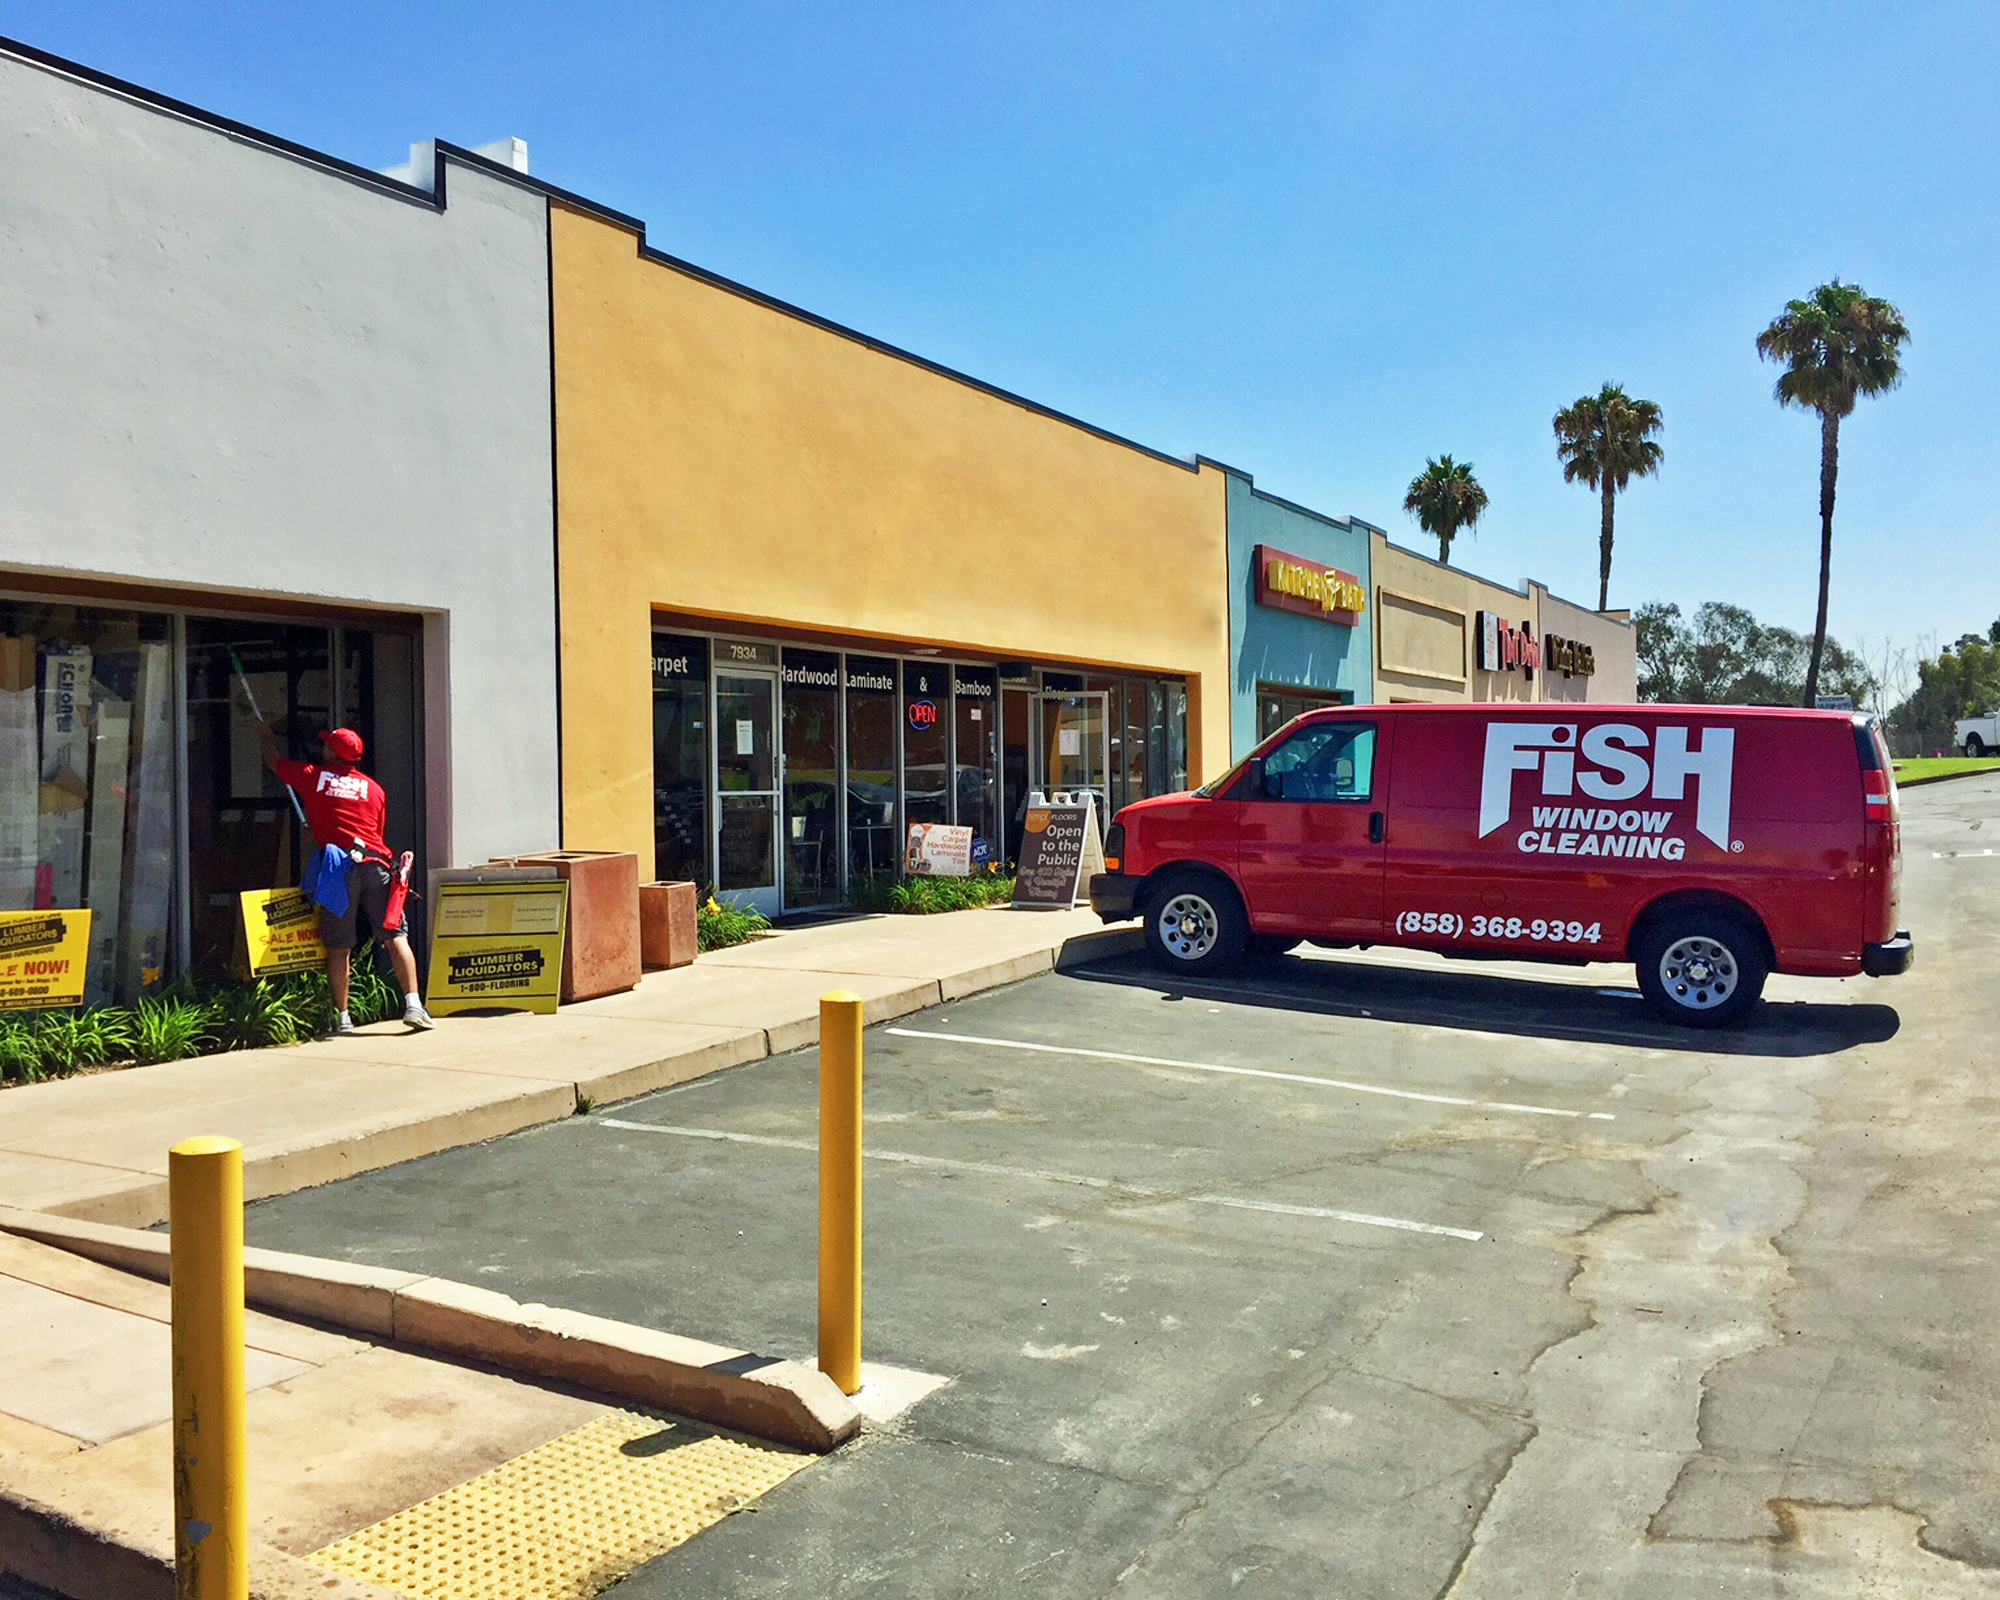 Fish Window Cleaning Branded Van in Front of Commercial Storefronts